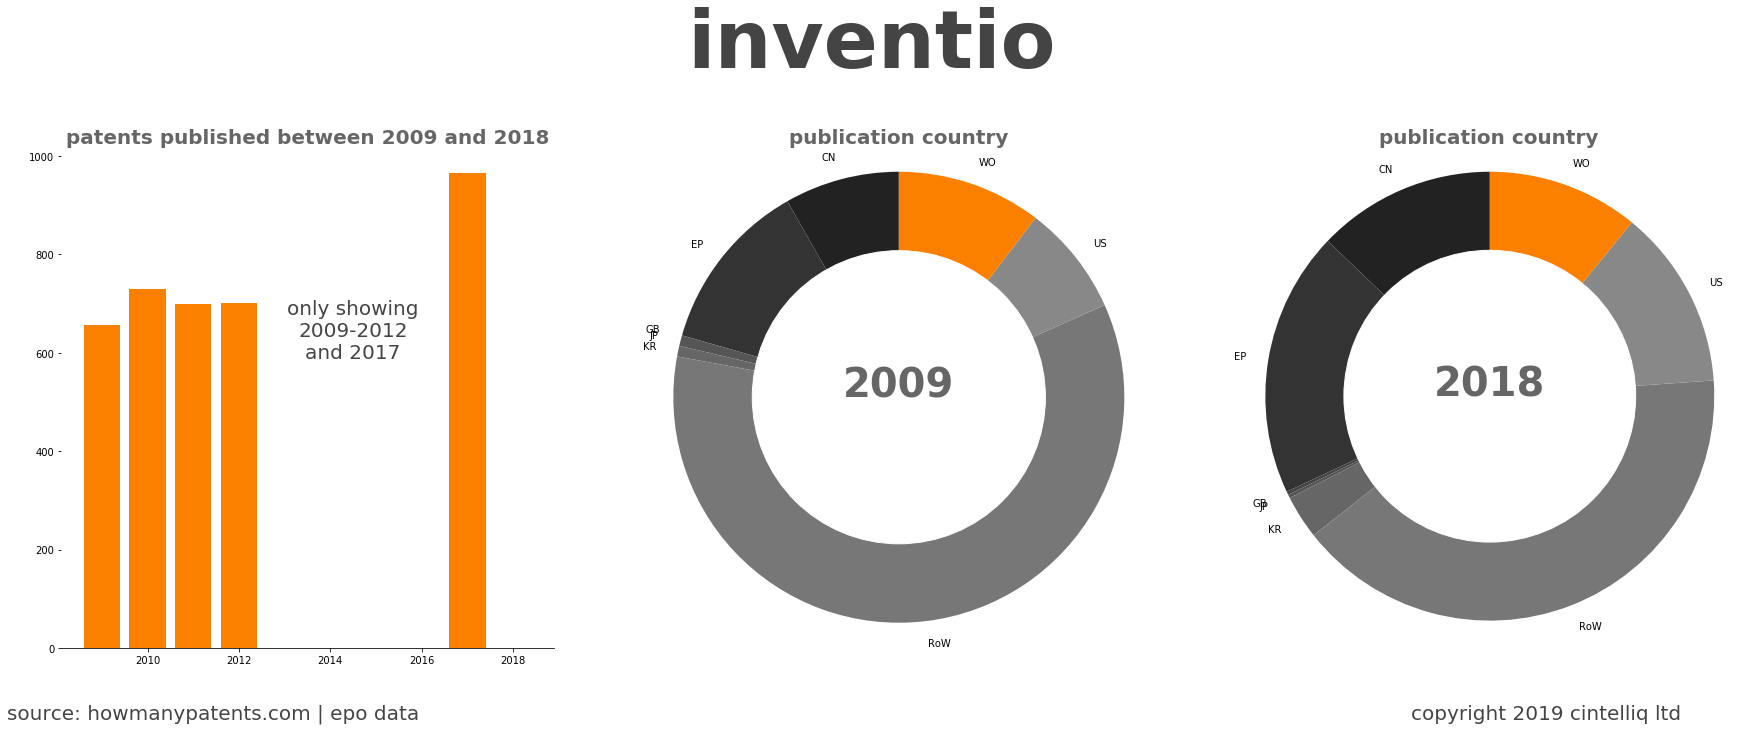 summary of patents for Inventio